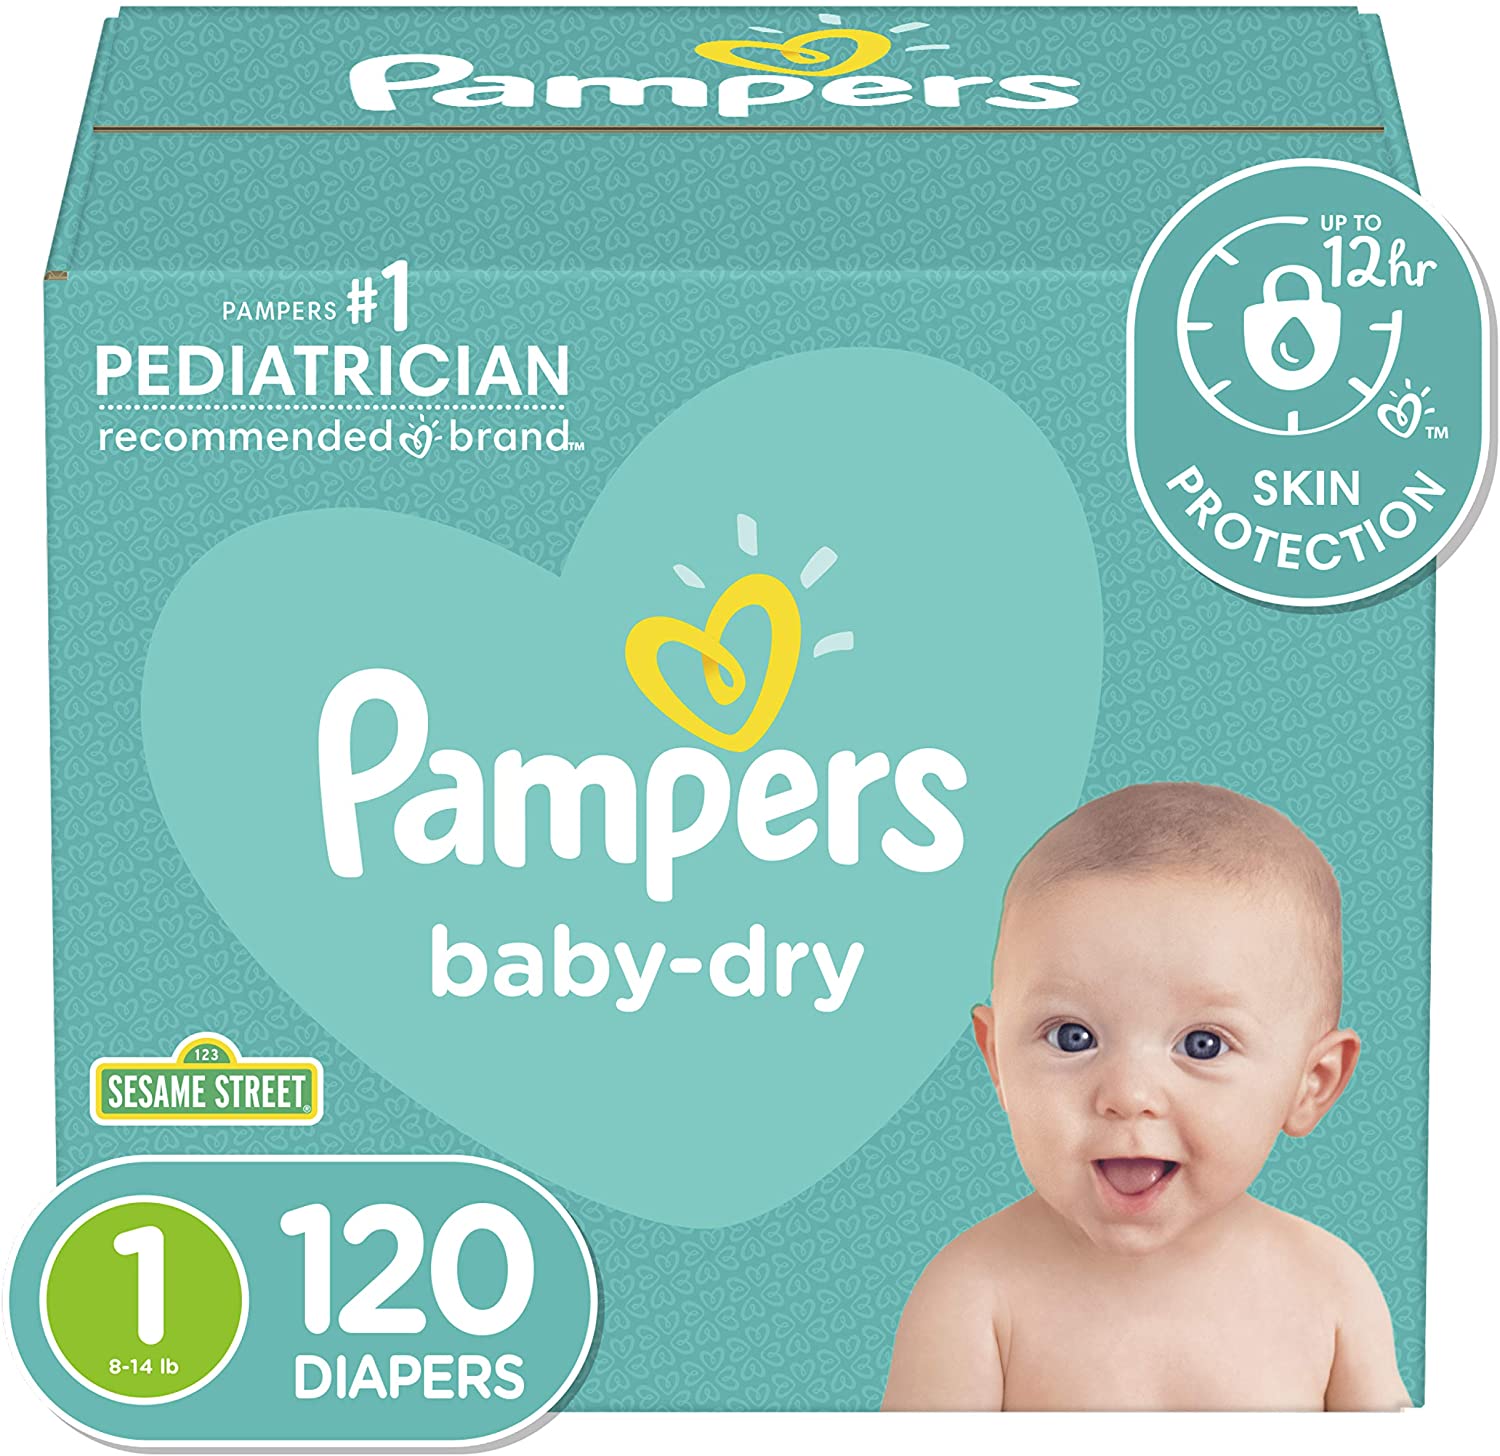 Pampers Baby Dry Diapers - Size 1 (120 Count)   $19.99 @ Amazon